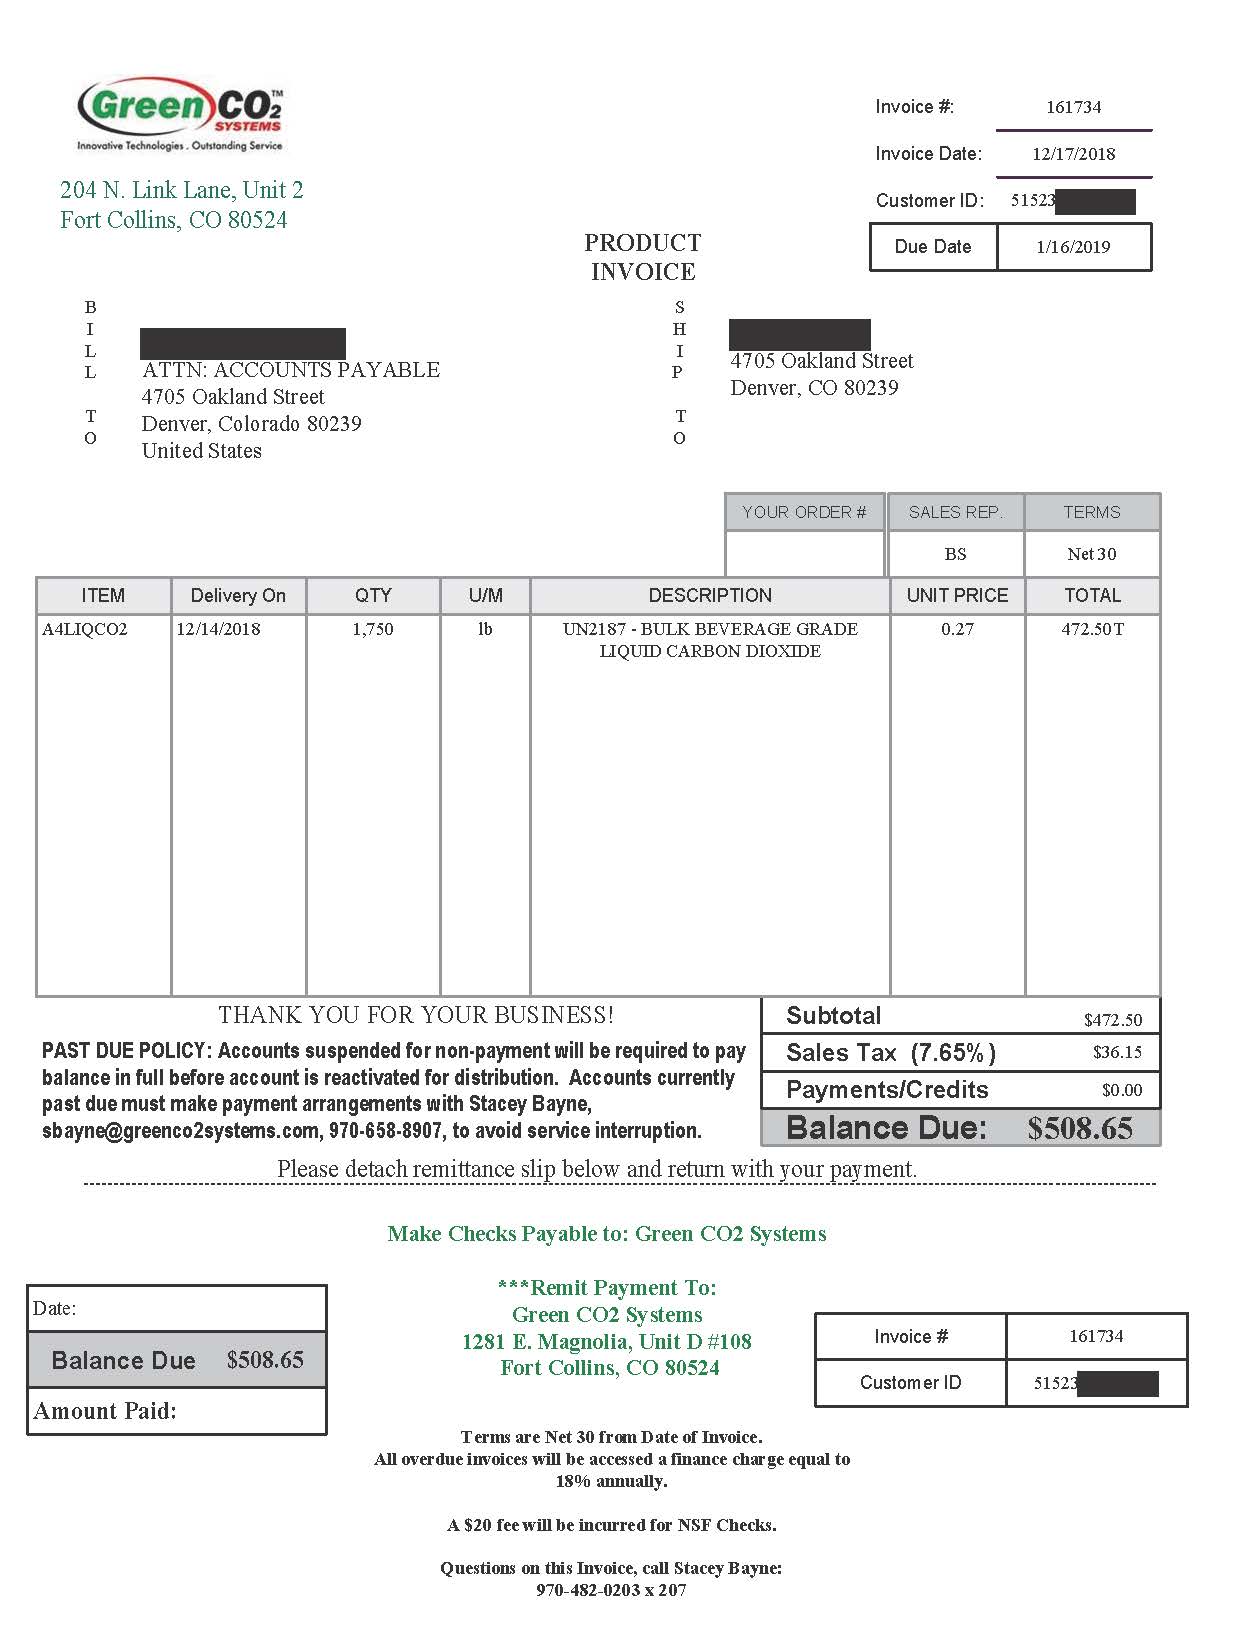 Example Invoice for Dext | Accountingprose